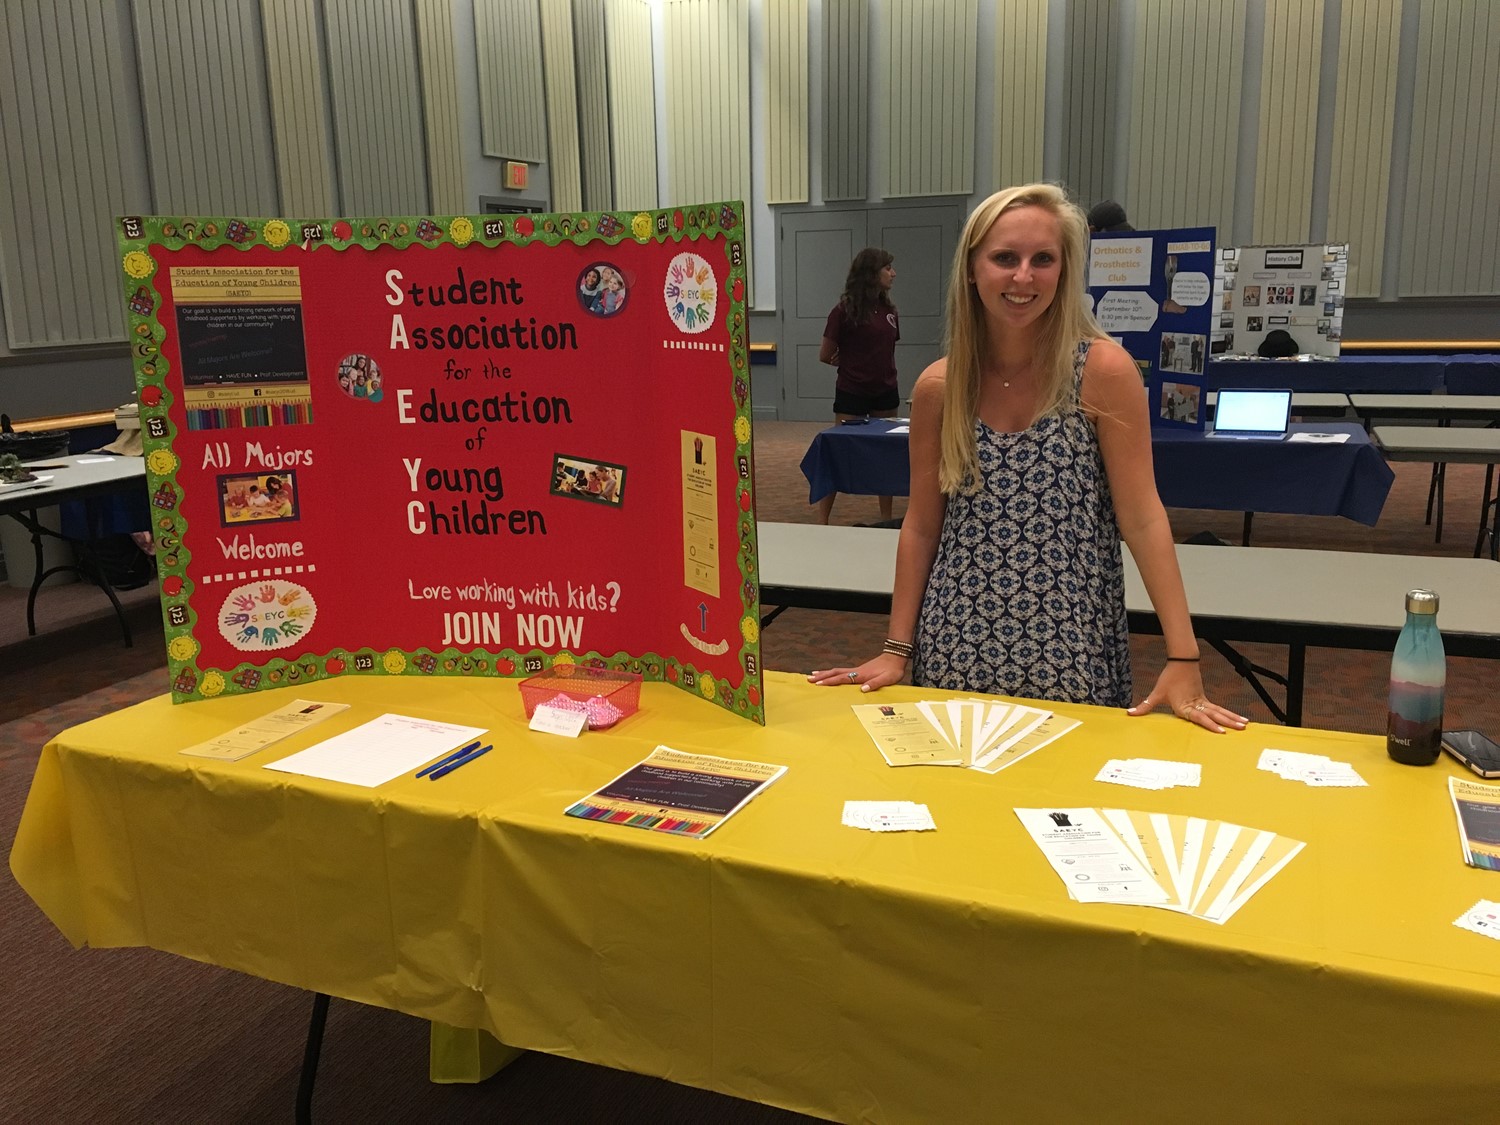 Member fo Student Association for the Education of Young Children stands behind an information table.